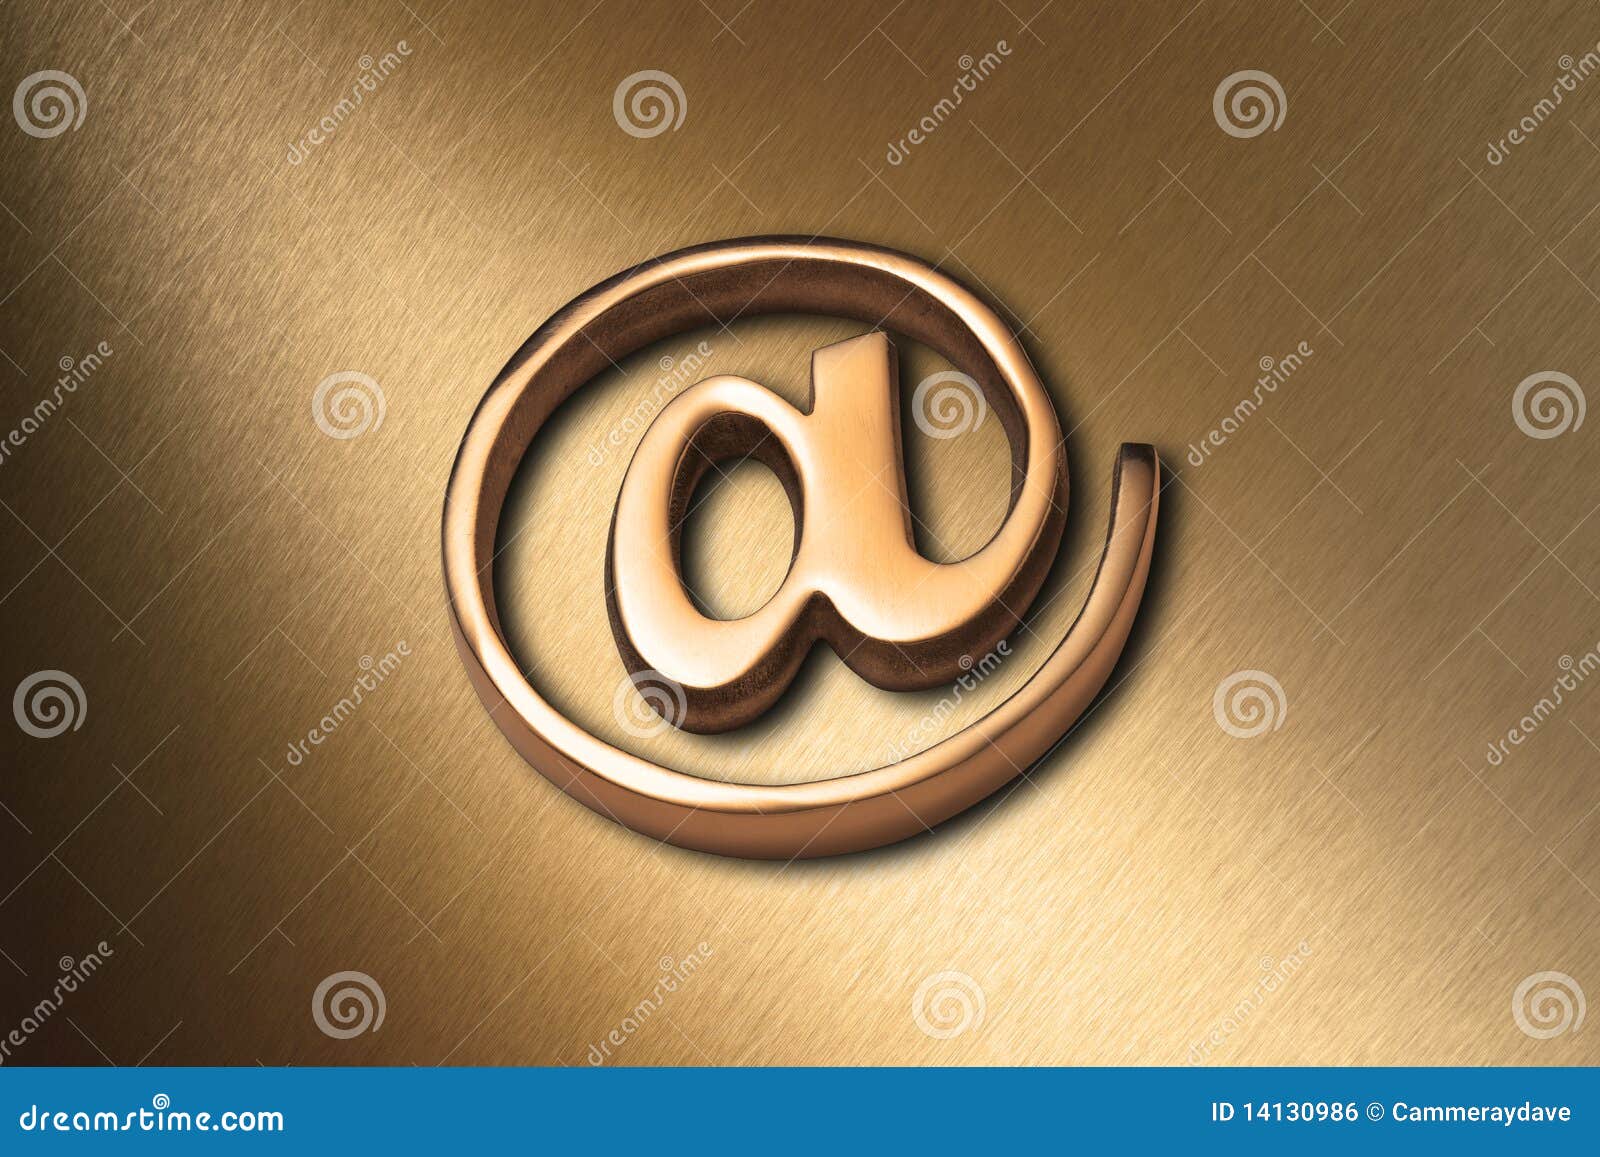 gold @ internet email background